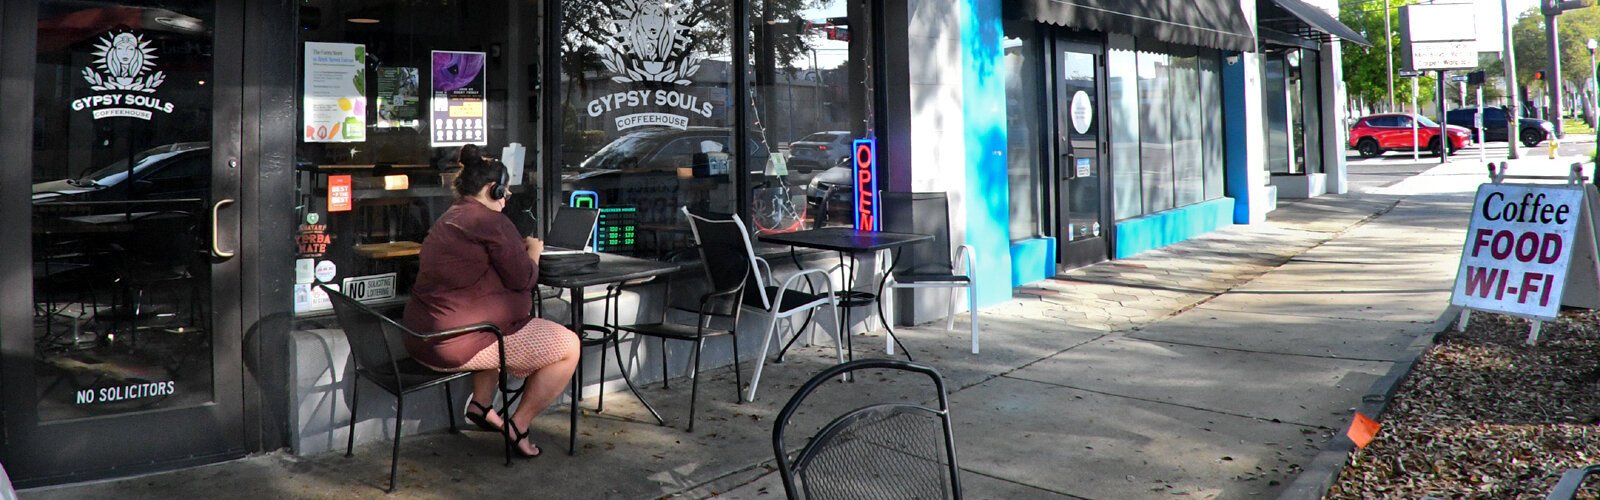 The Gypsy Souls Coffee House in St. Petes' MLK North District describes itself as “a place where anyone can visit and feel like family no matter what part of the world they come from."